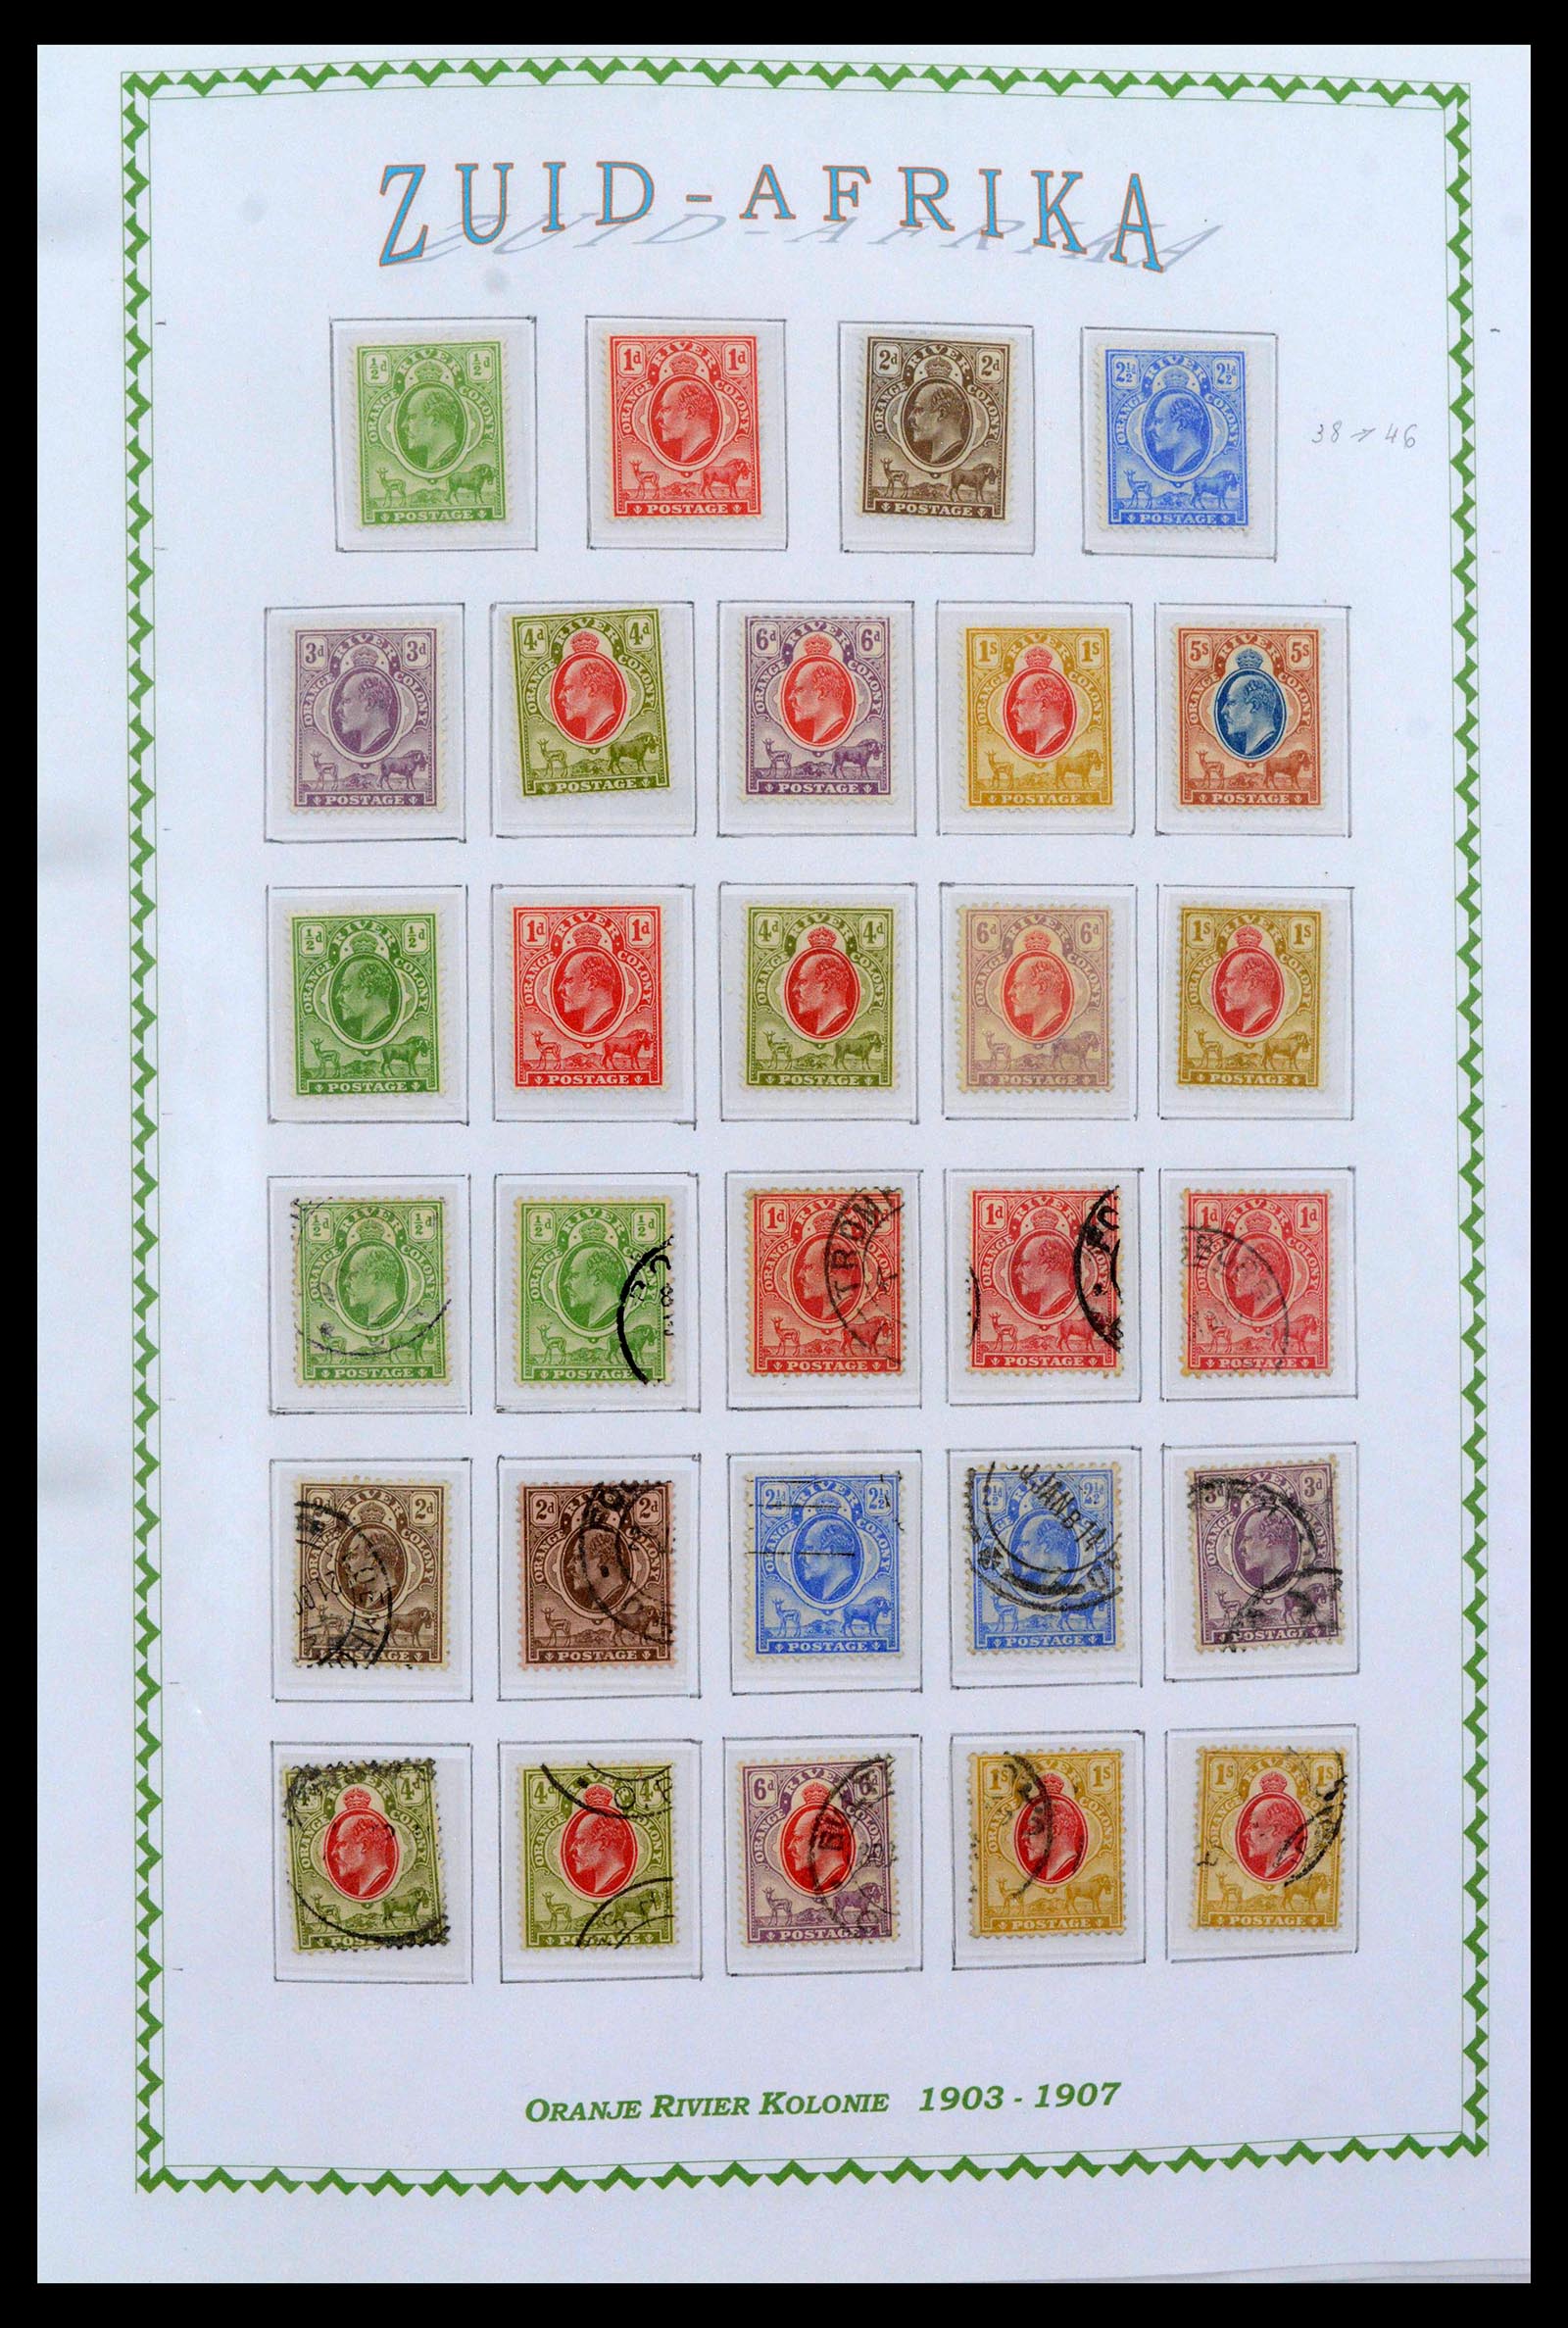 39226 0010 - Stamp collection 39226 South Africa and States 1853-2000.